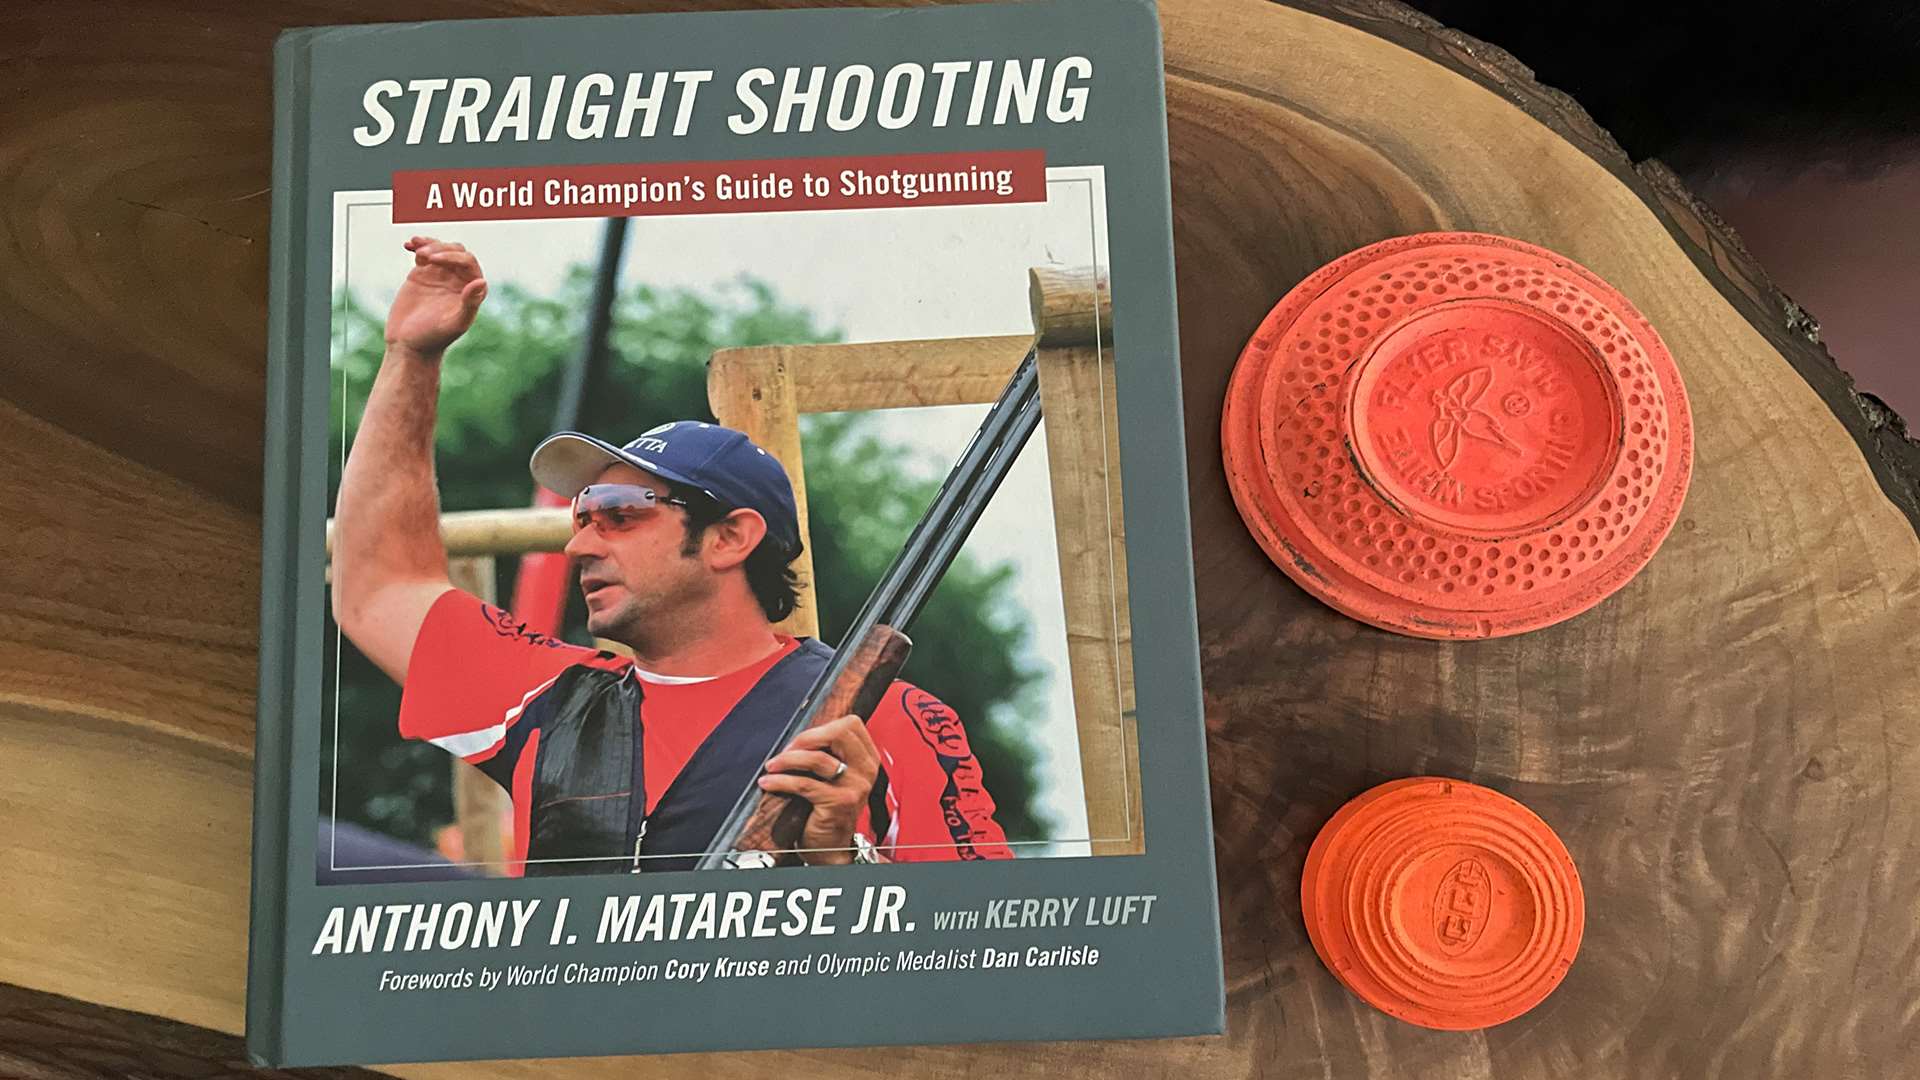 “Straight Shooting: A World Champion’s Guide to Shotgunning”